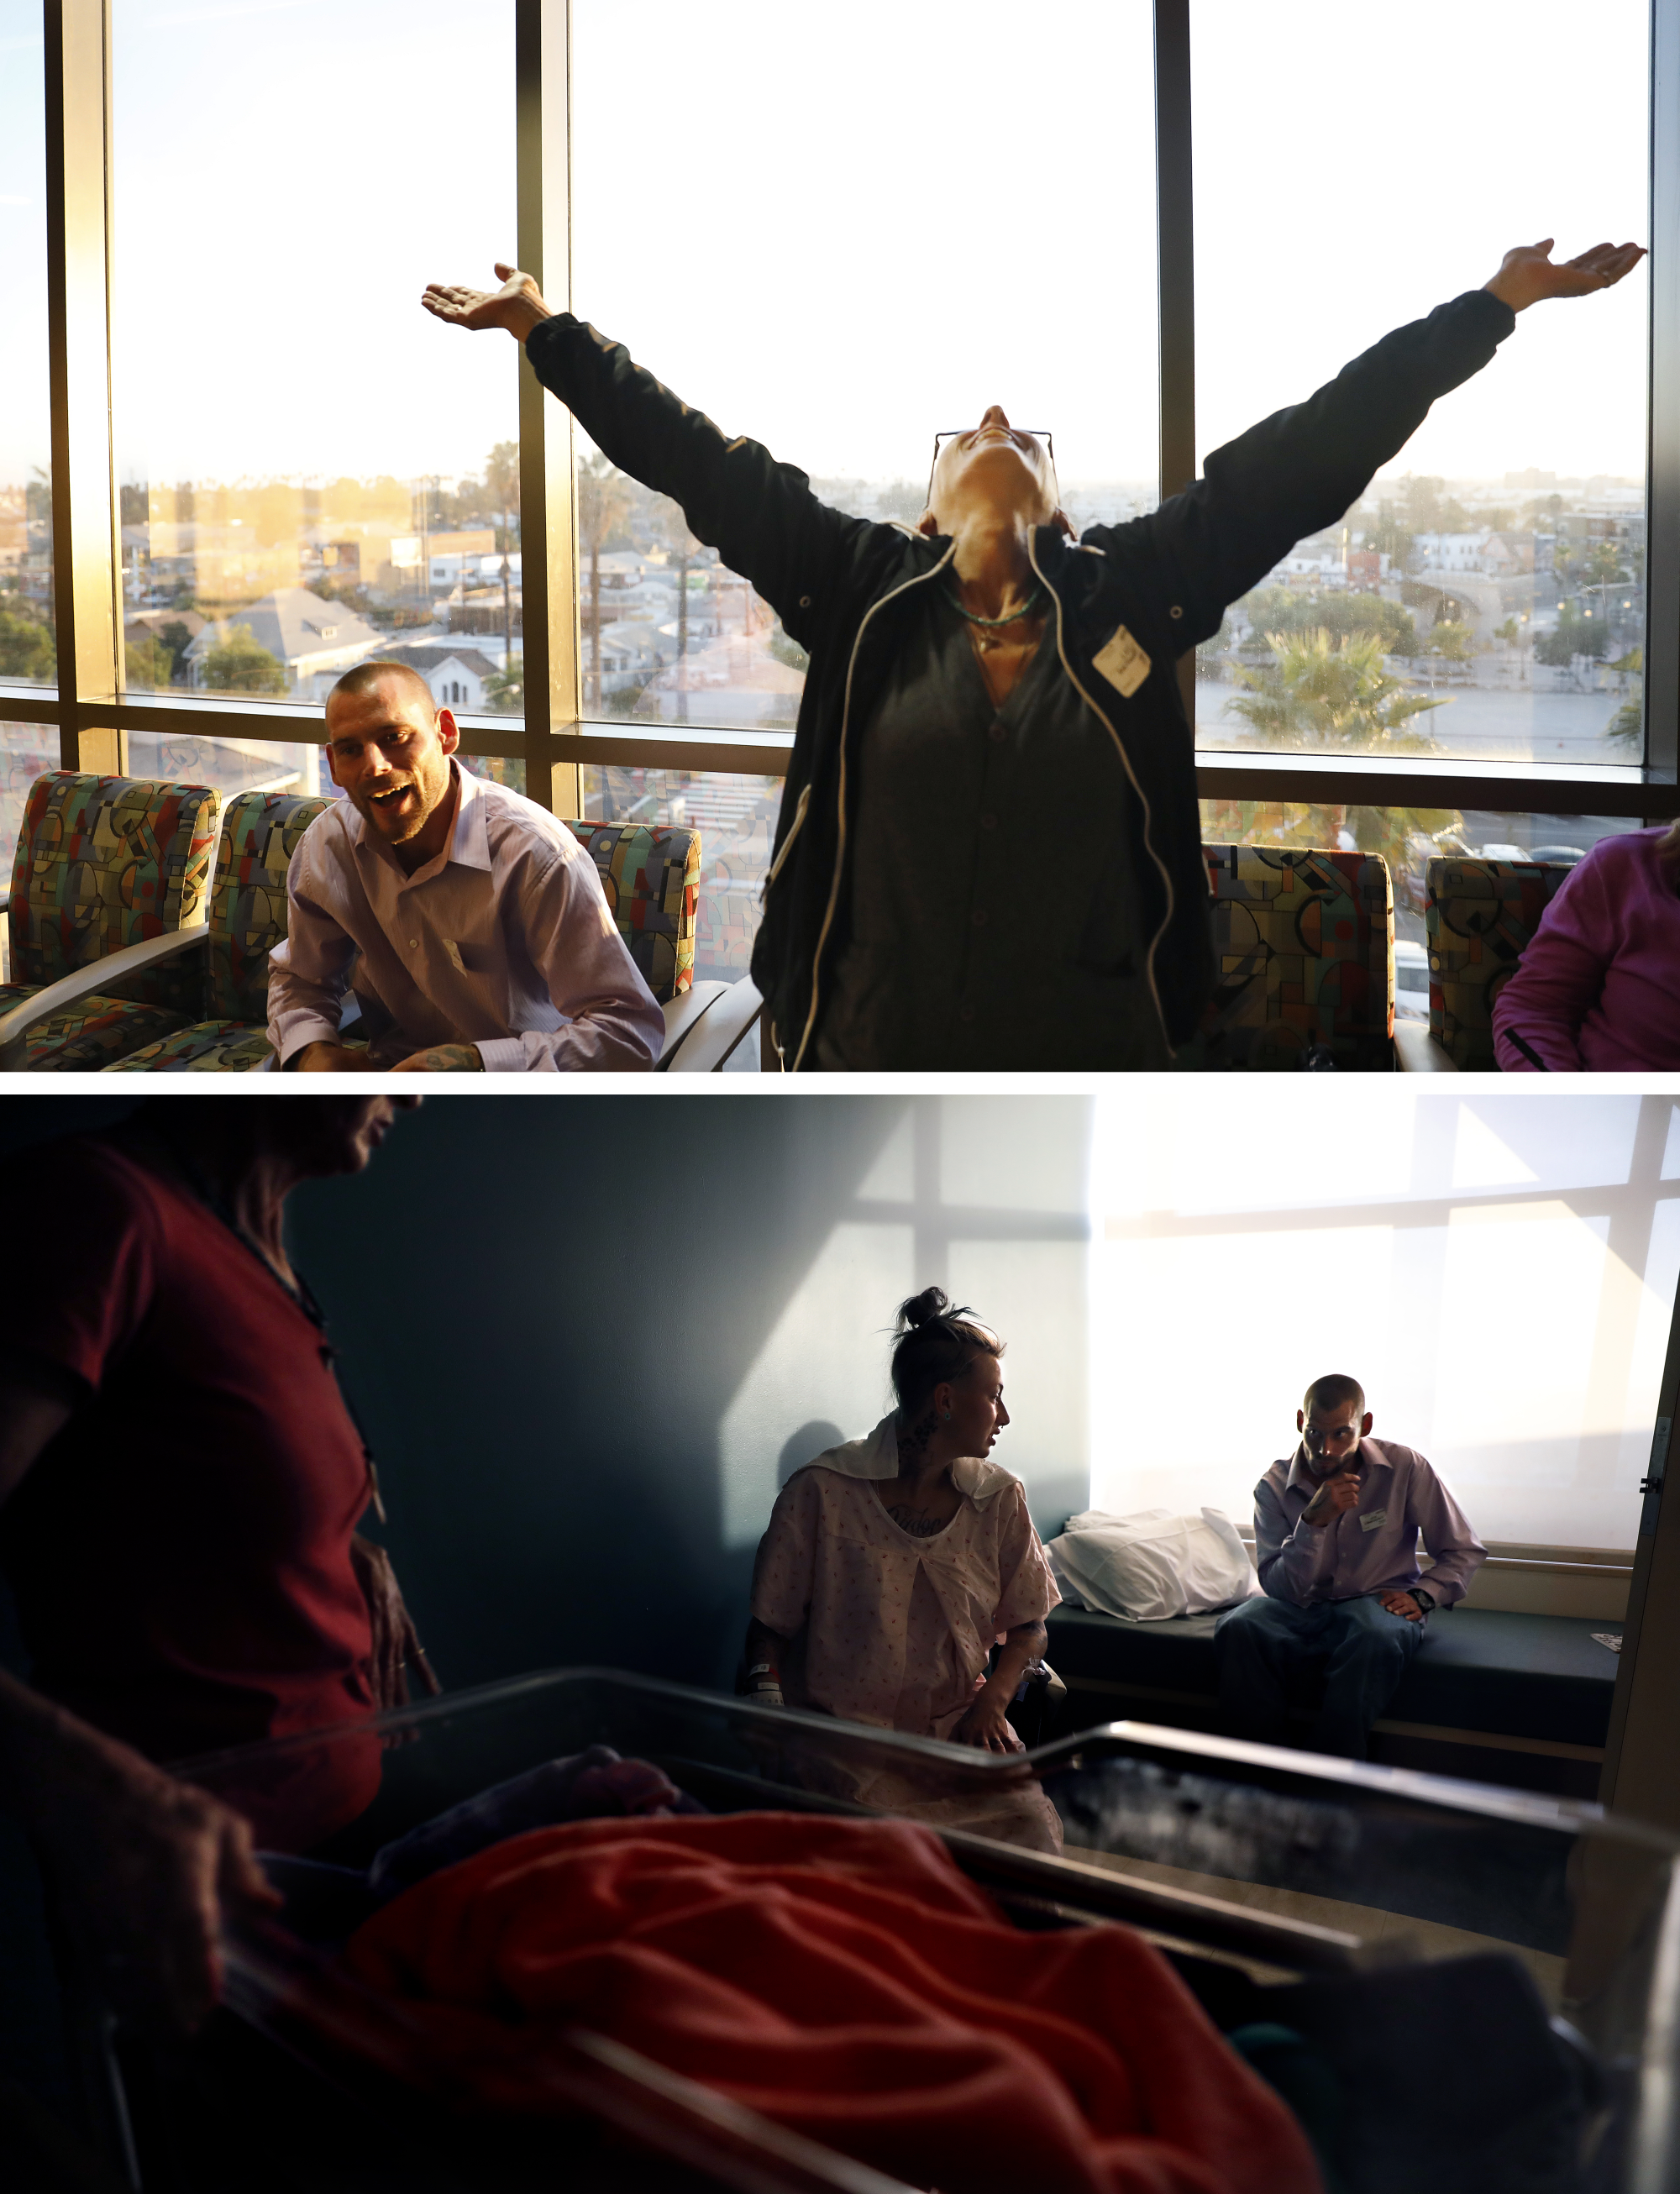 Two photos. A woman with arms outstretched in joy. Two women and one man talk around a baby in a hospital carrier